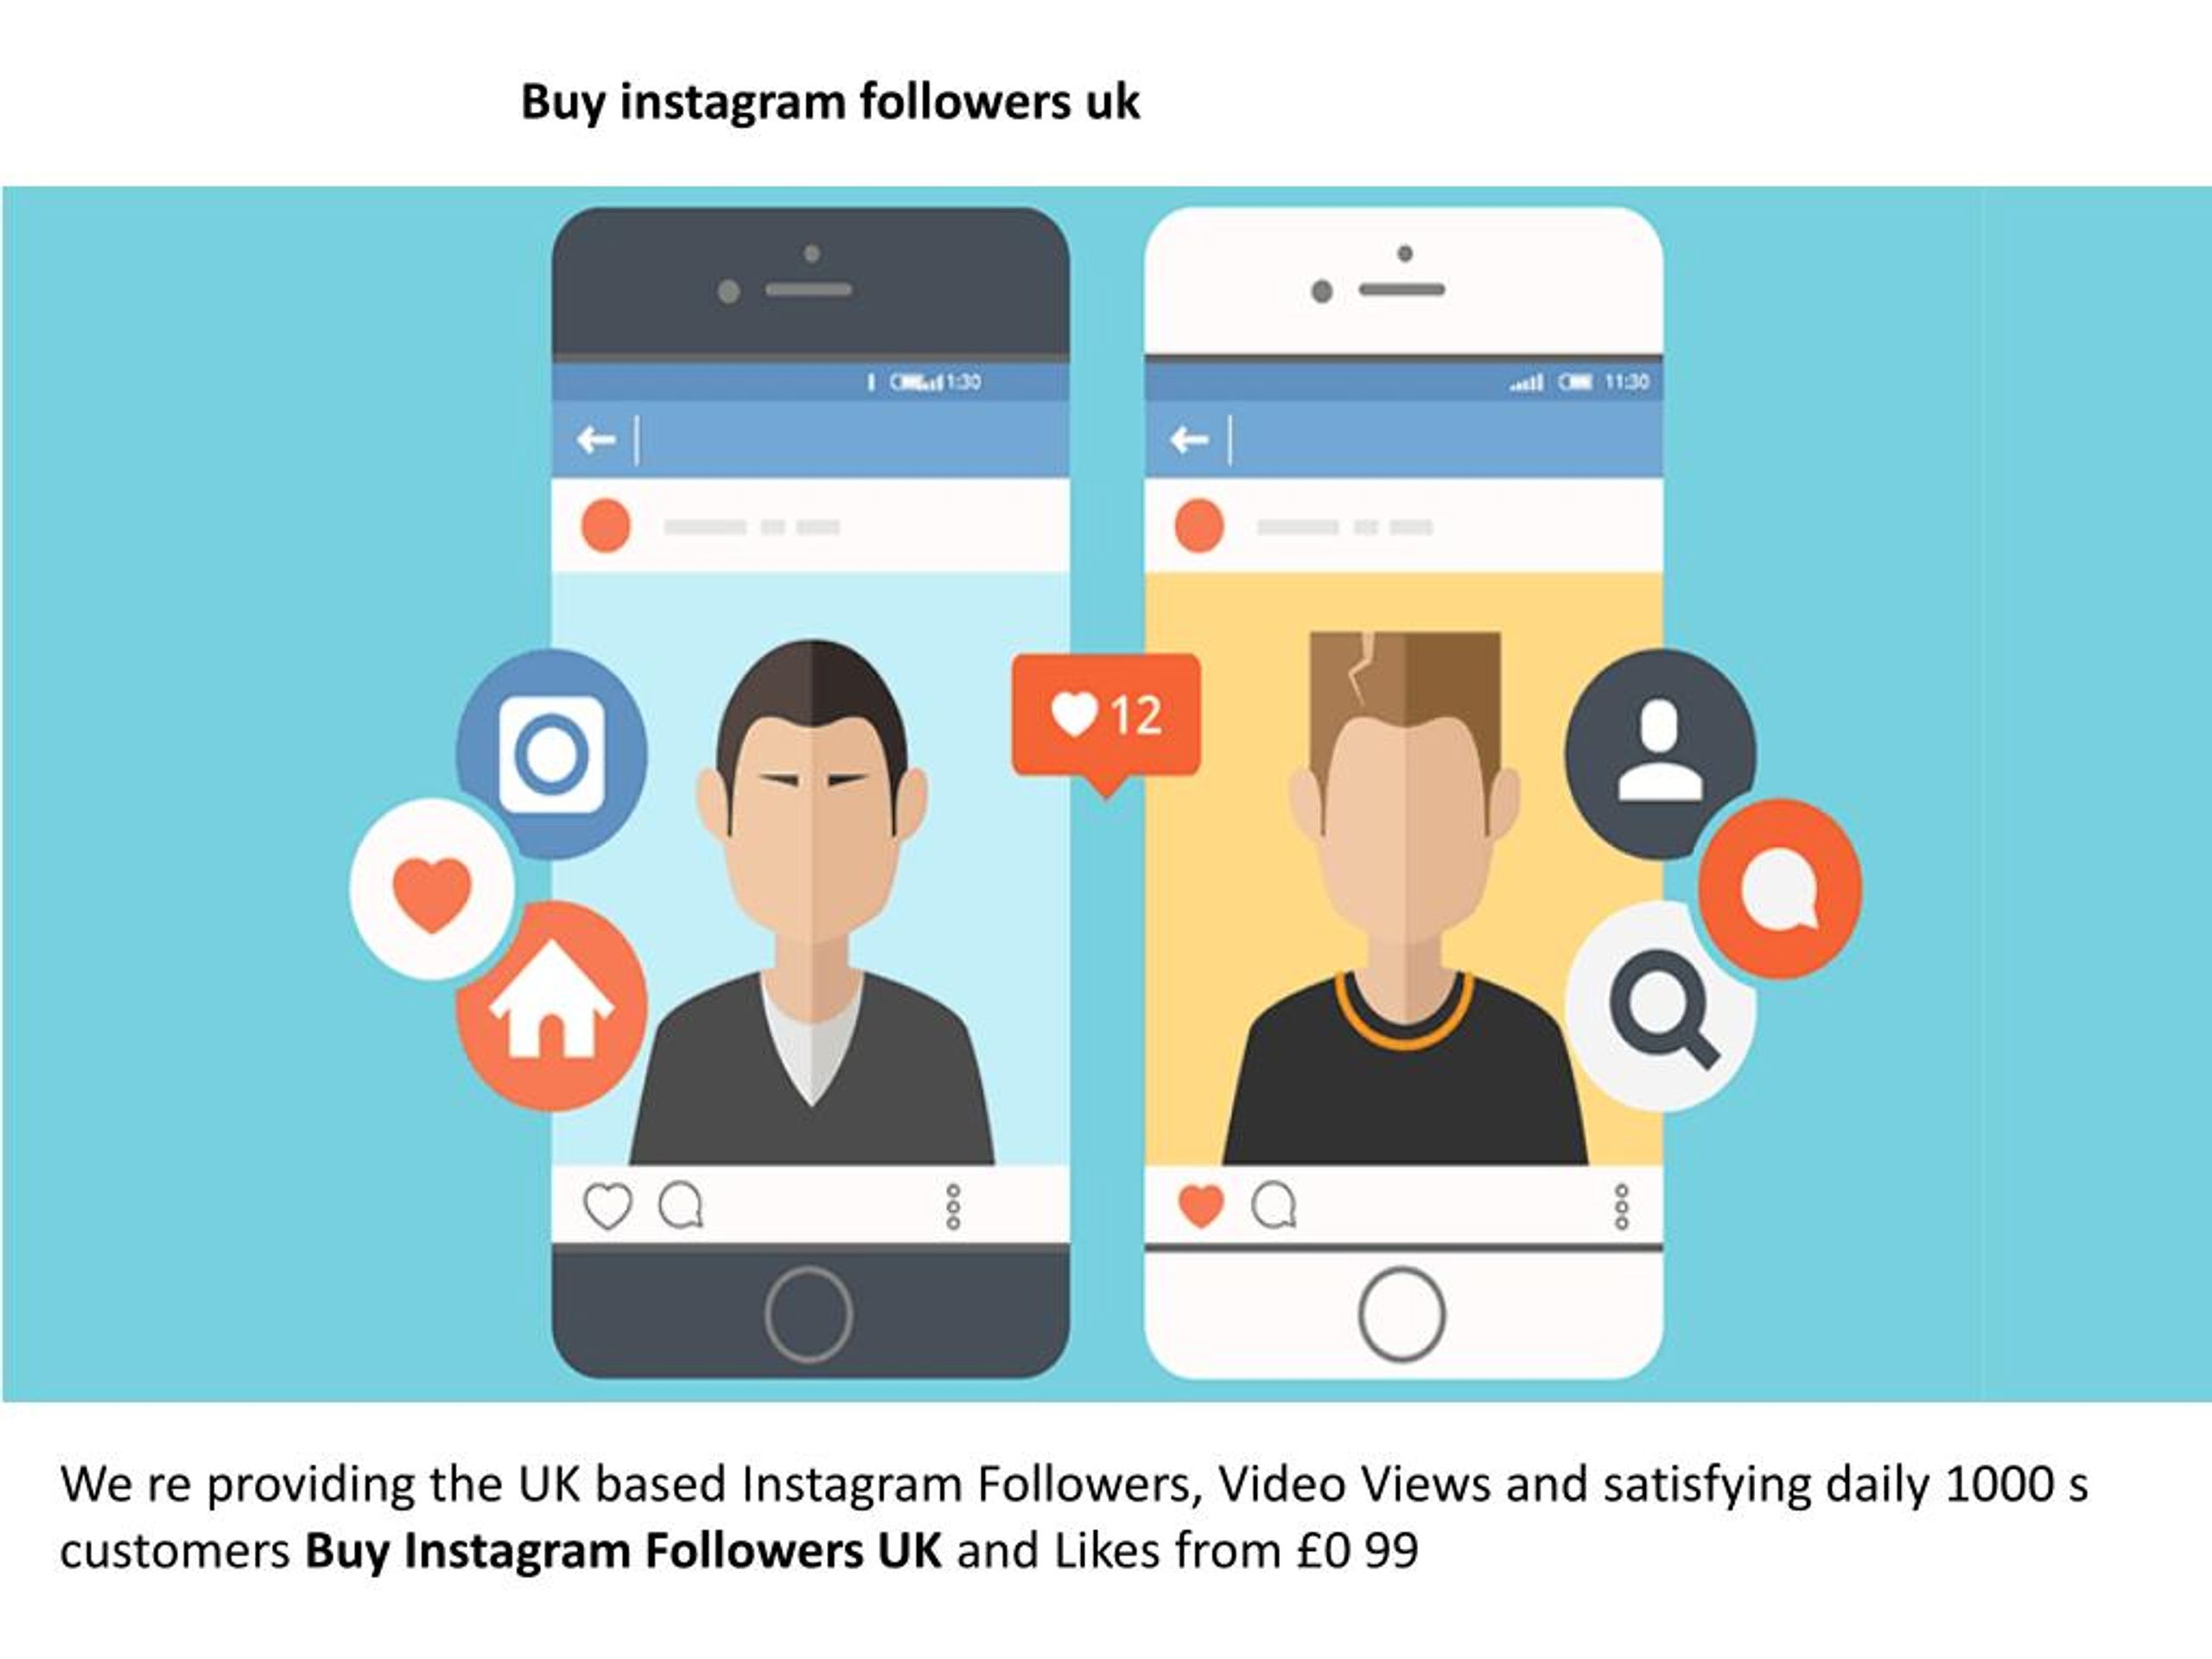 How can you buy your followers on instagram